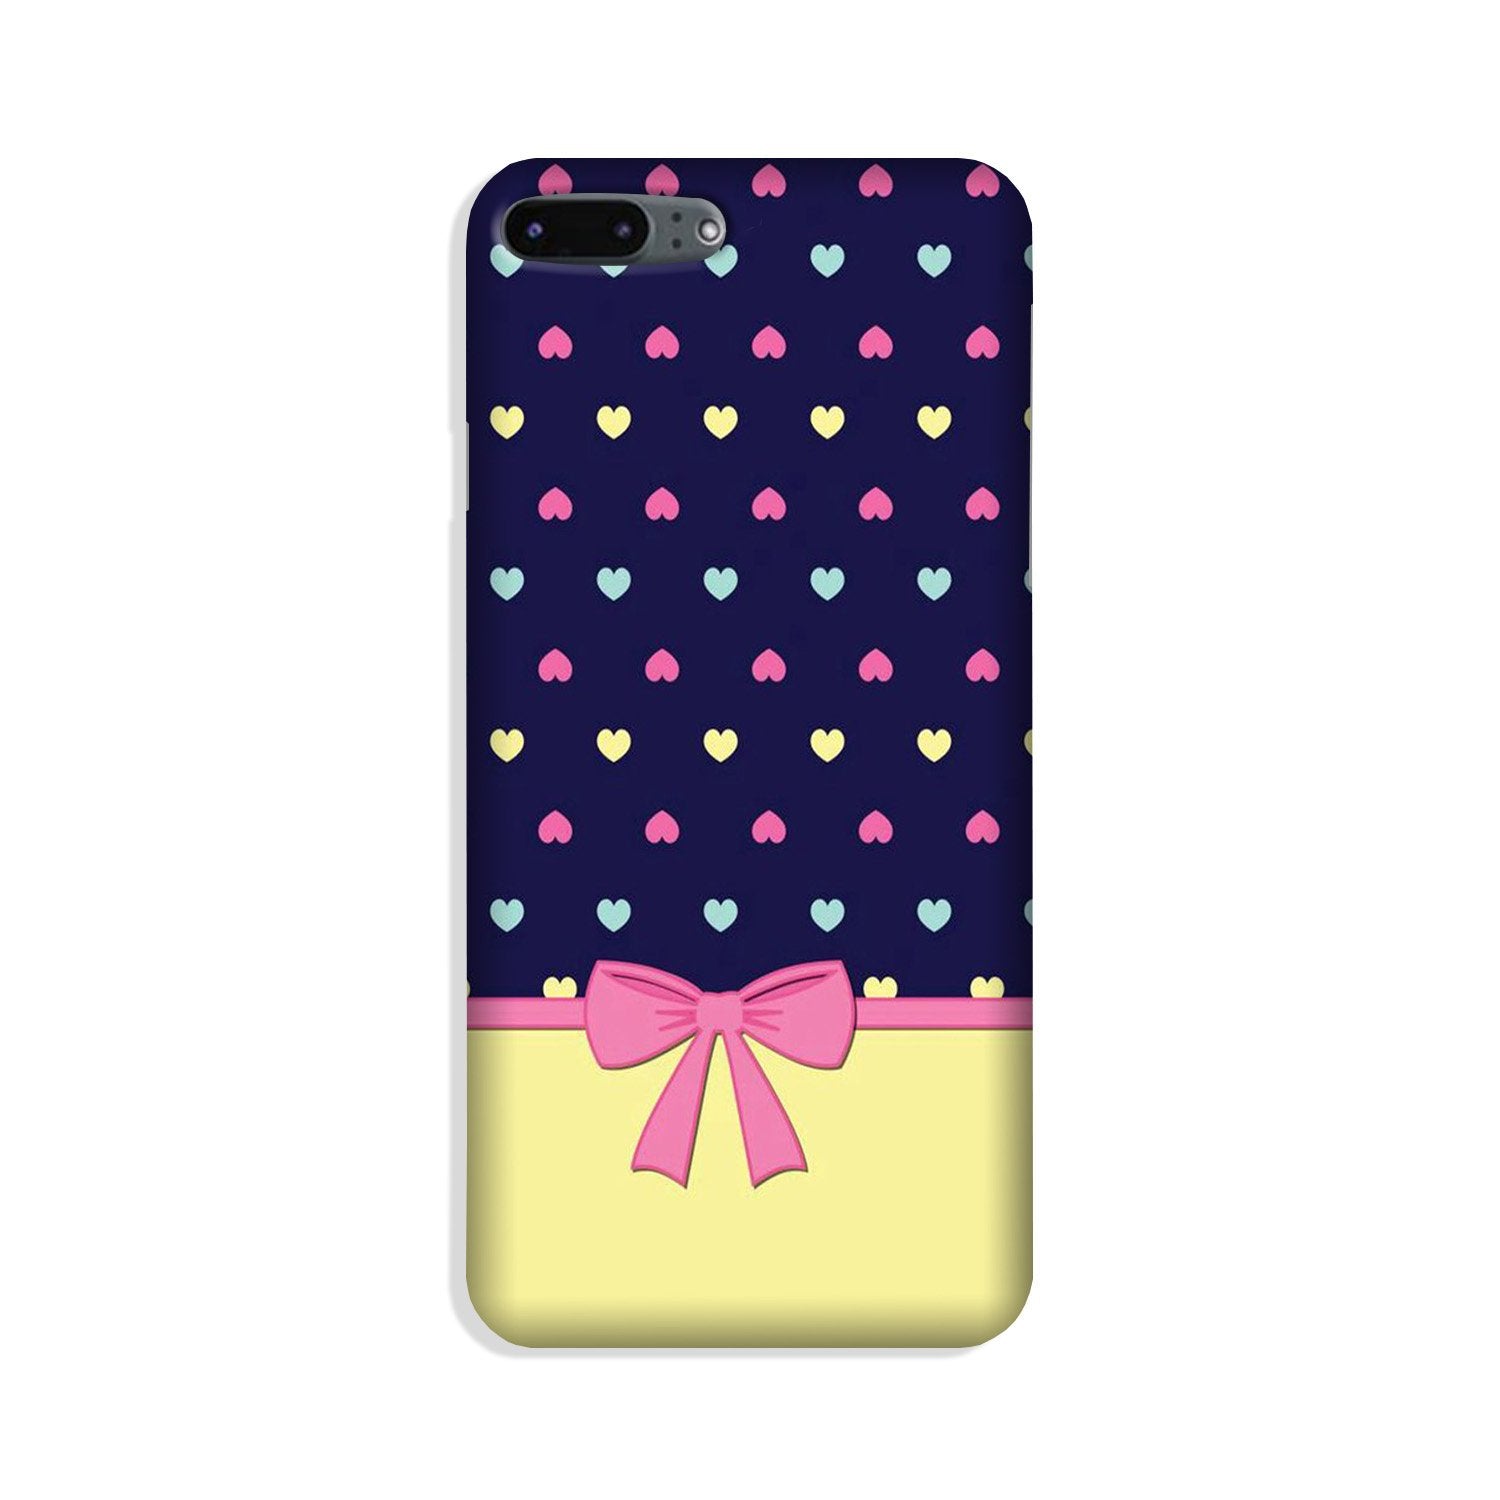 Gift Wrap5 Case for iPhone 8 Plus